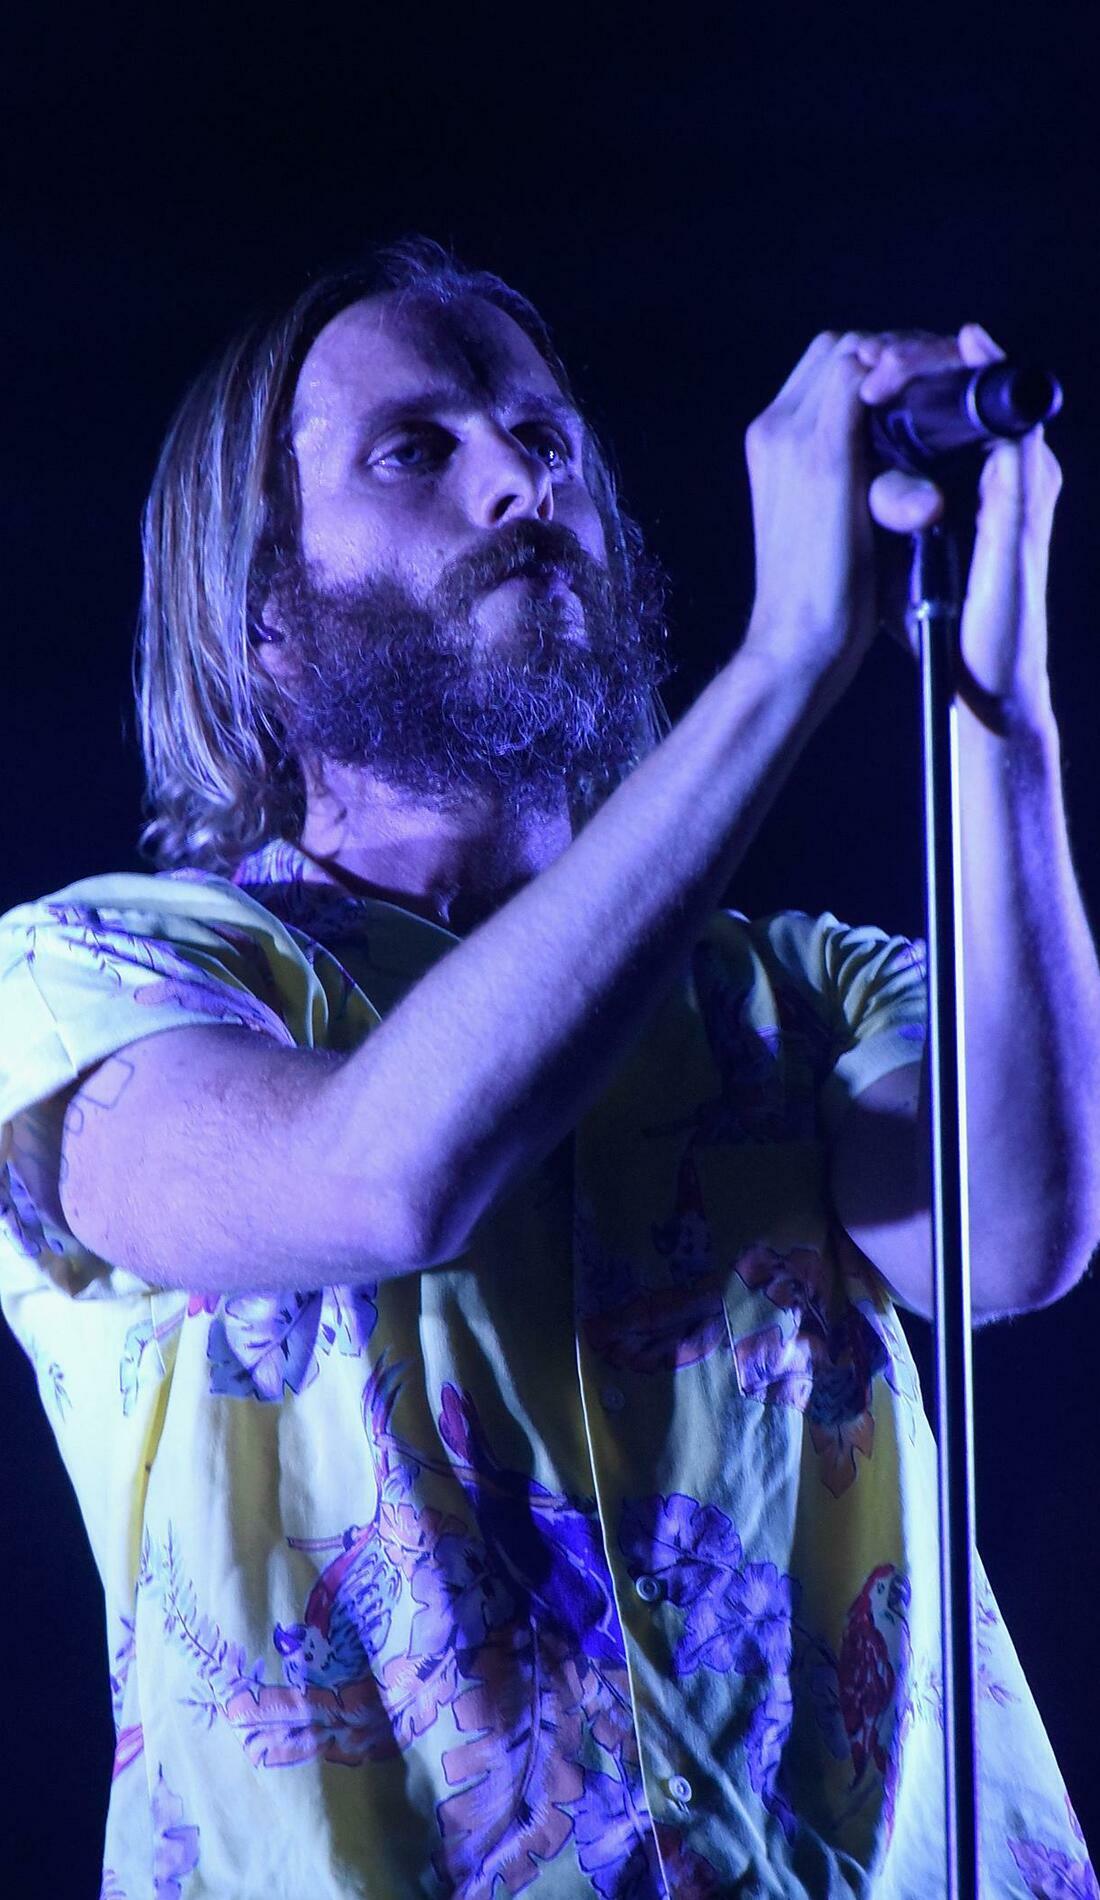 A AWOLNATION live event